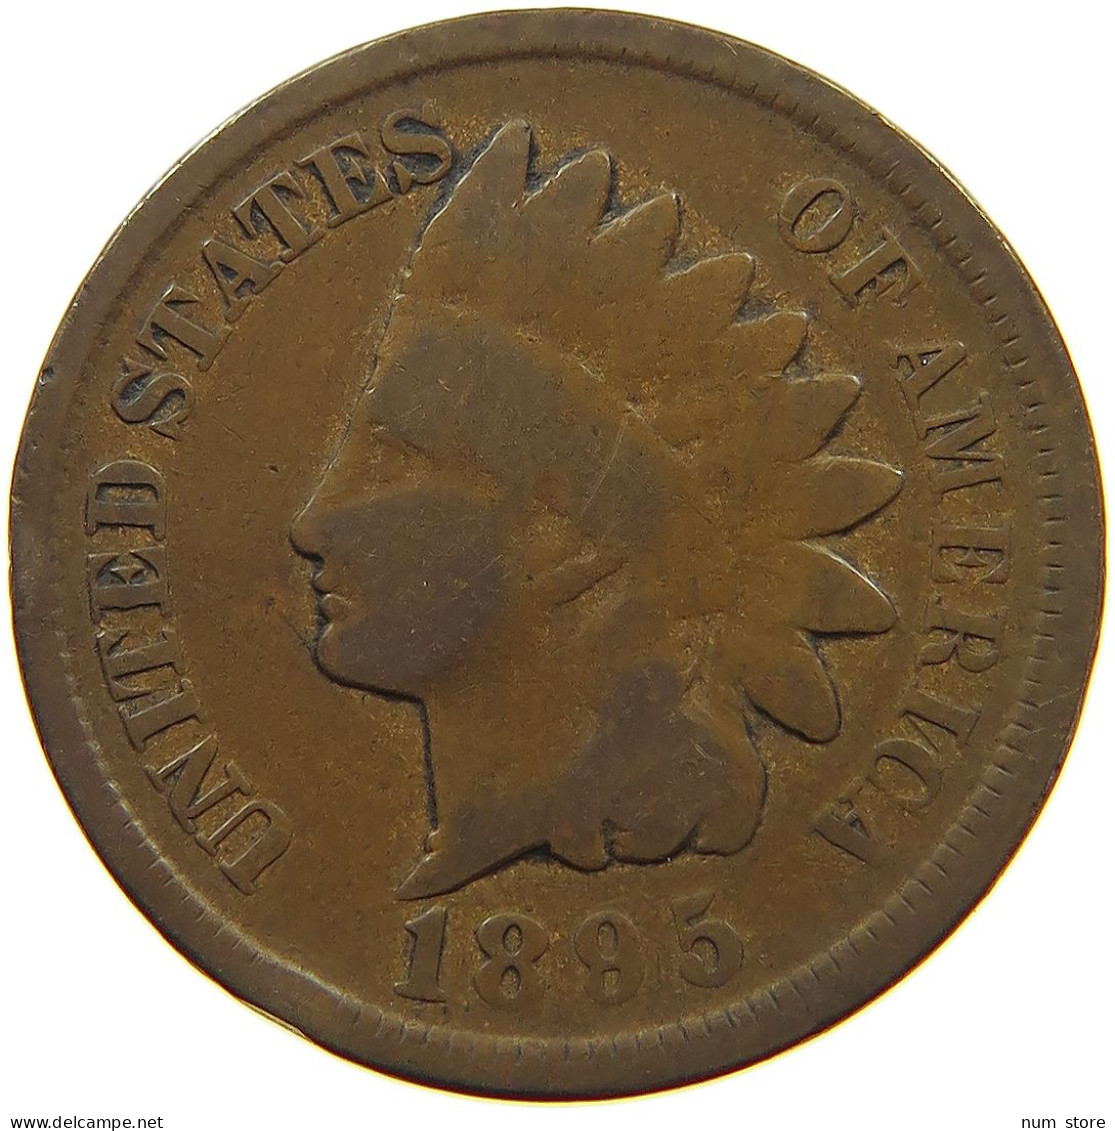 UNITED STATES OF AMERICA CENT 1895 INDIAN HEAD #s063 0397 - 1859-1909: Indian Head